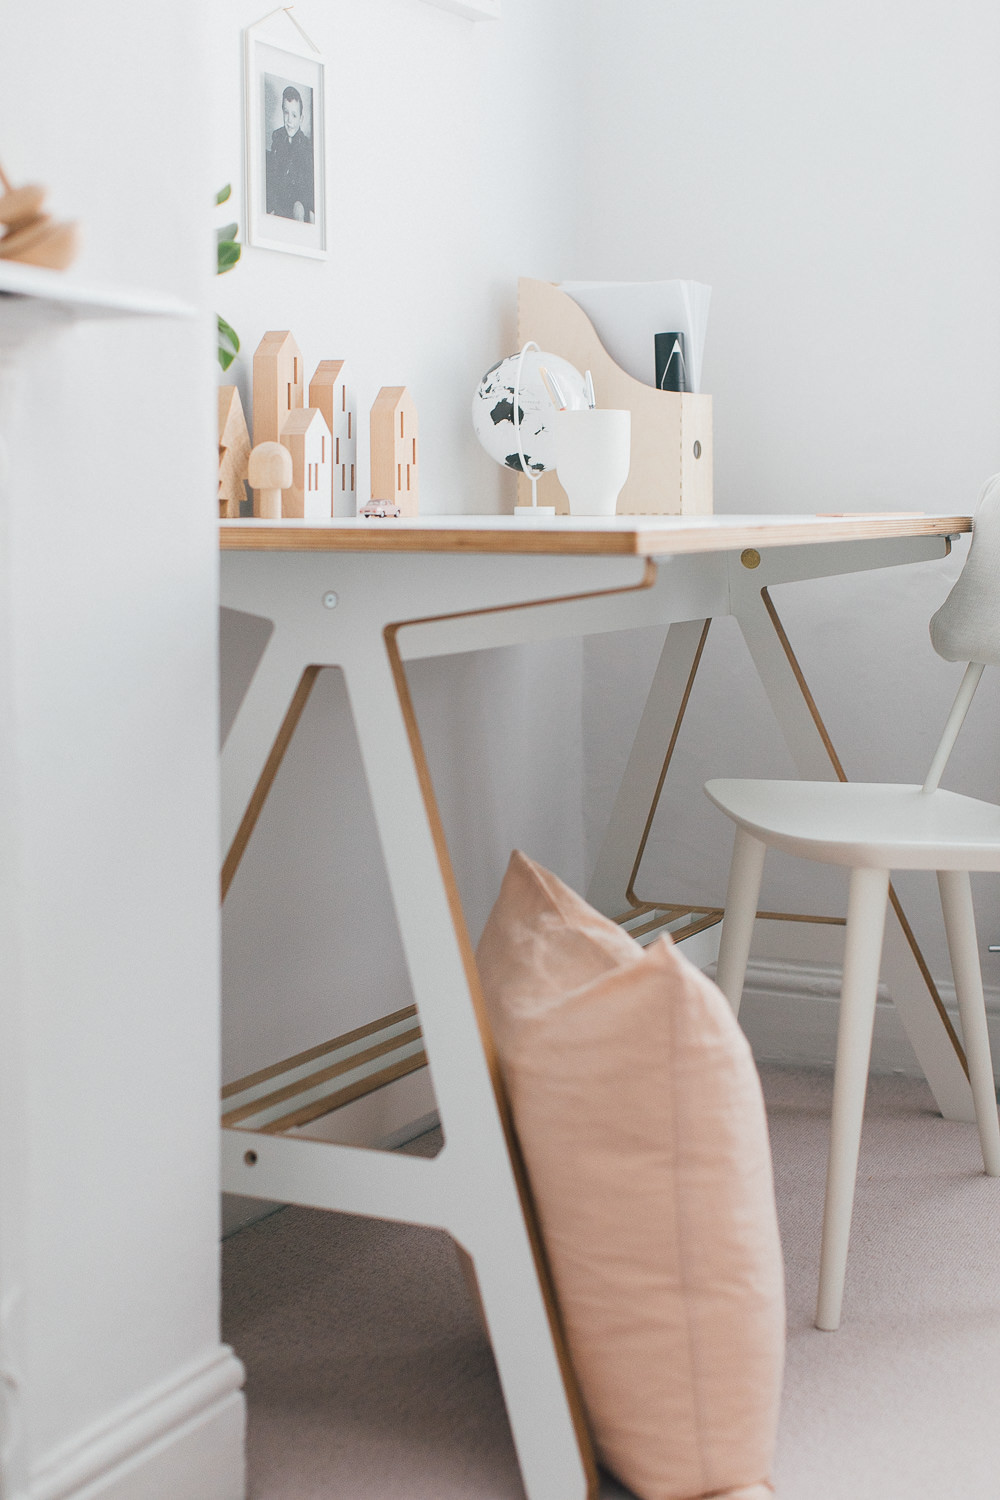 A Frame Desk | Neutral Desk Accessories | White Desk Chair | Statement Wall Light | A modern neutral millennial pink bedroom for children with handmade furniture, personalised artwork and statement lighting.